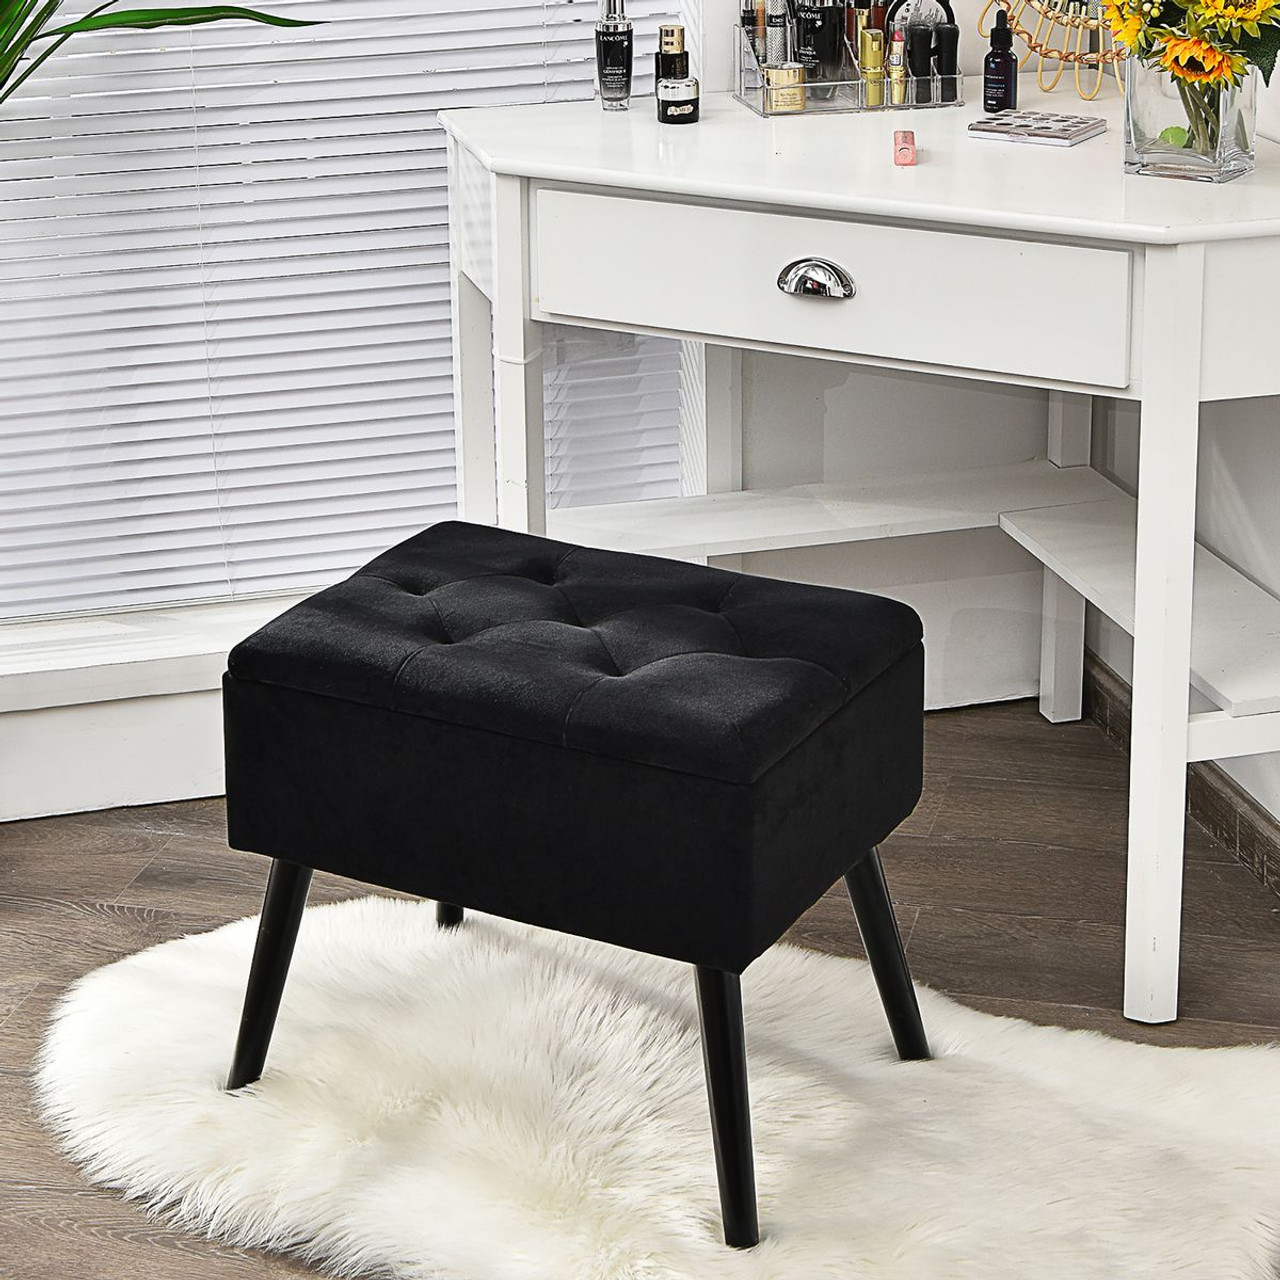 Velvet Storage Ottoman with Solid Wood Legs product image